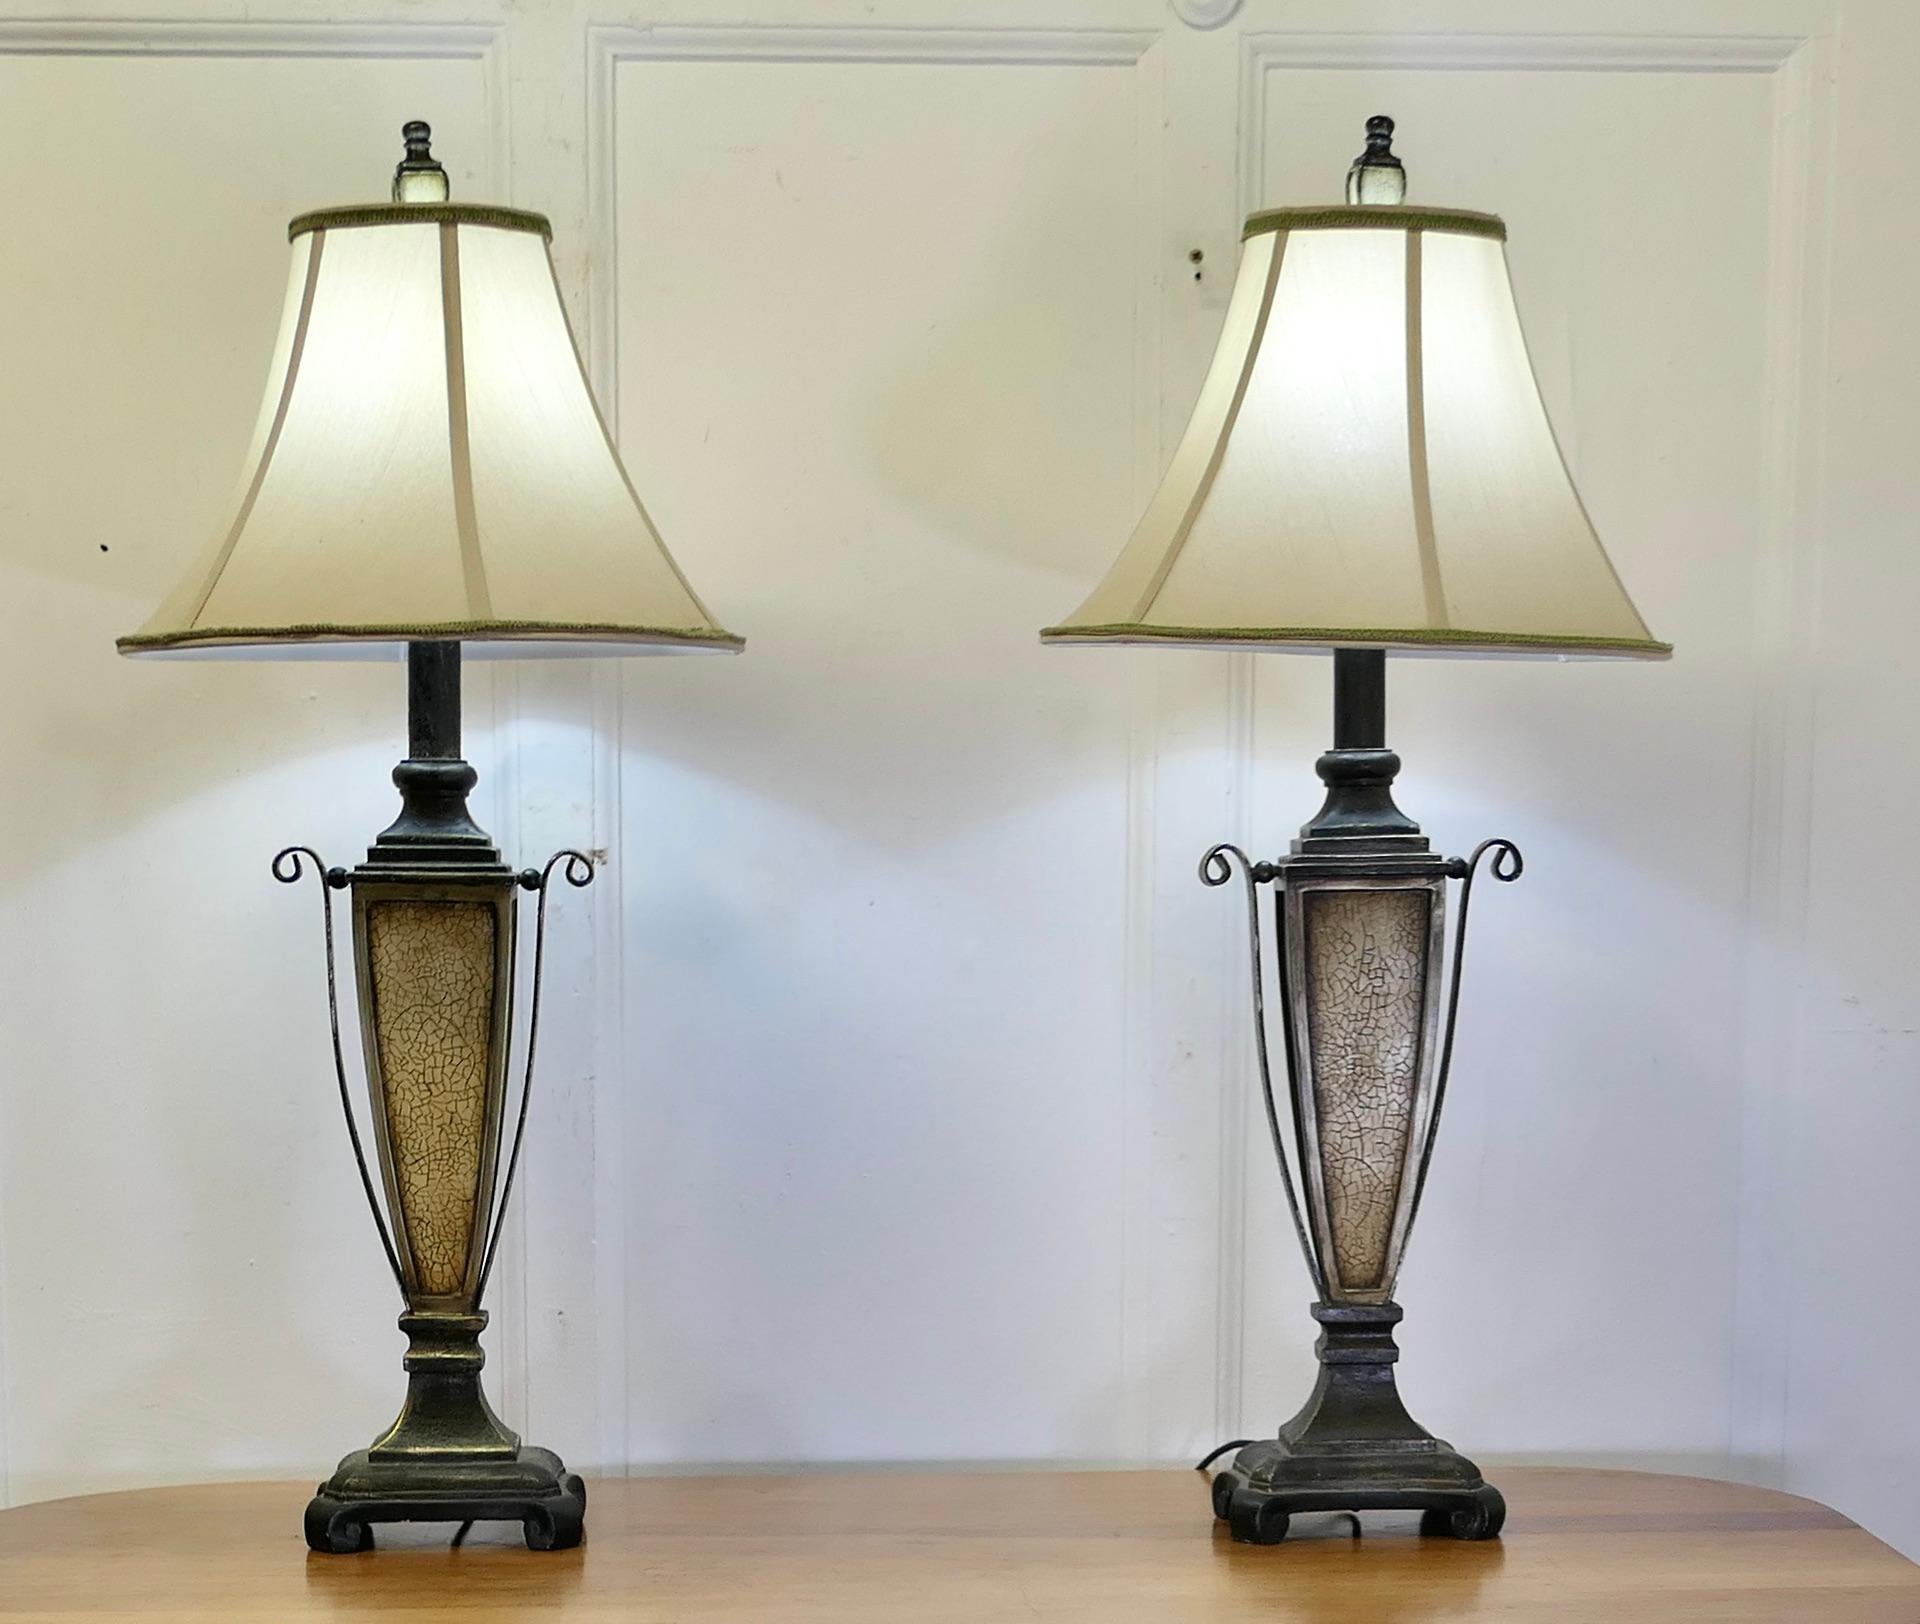 Adam Style Pair of Decorative Art Deco Style Table Lamps   An exciting pair of lamp For Sale